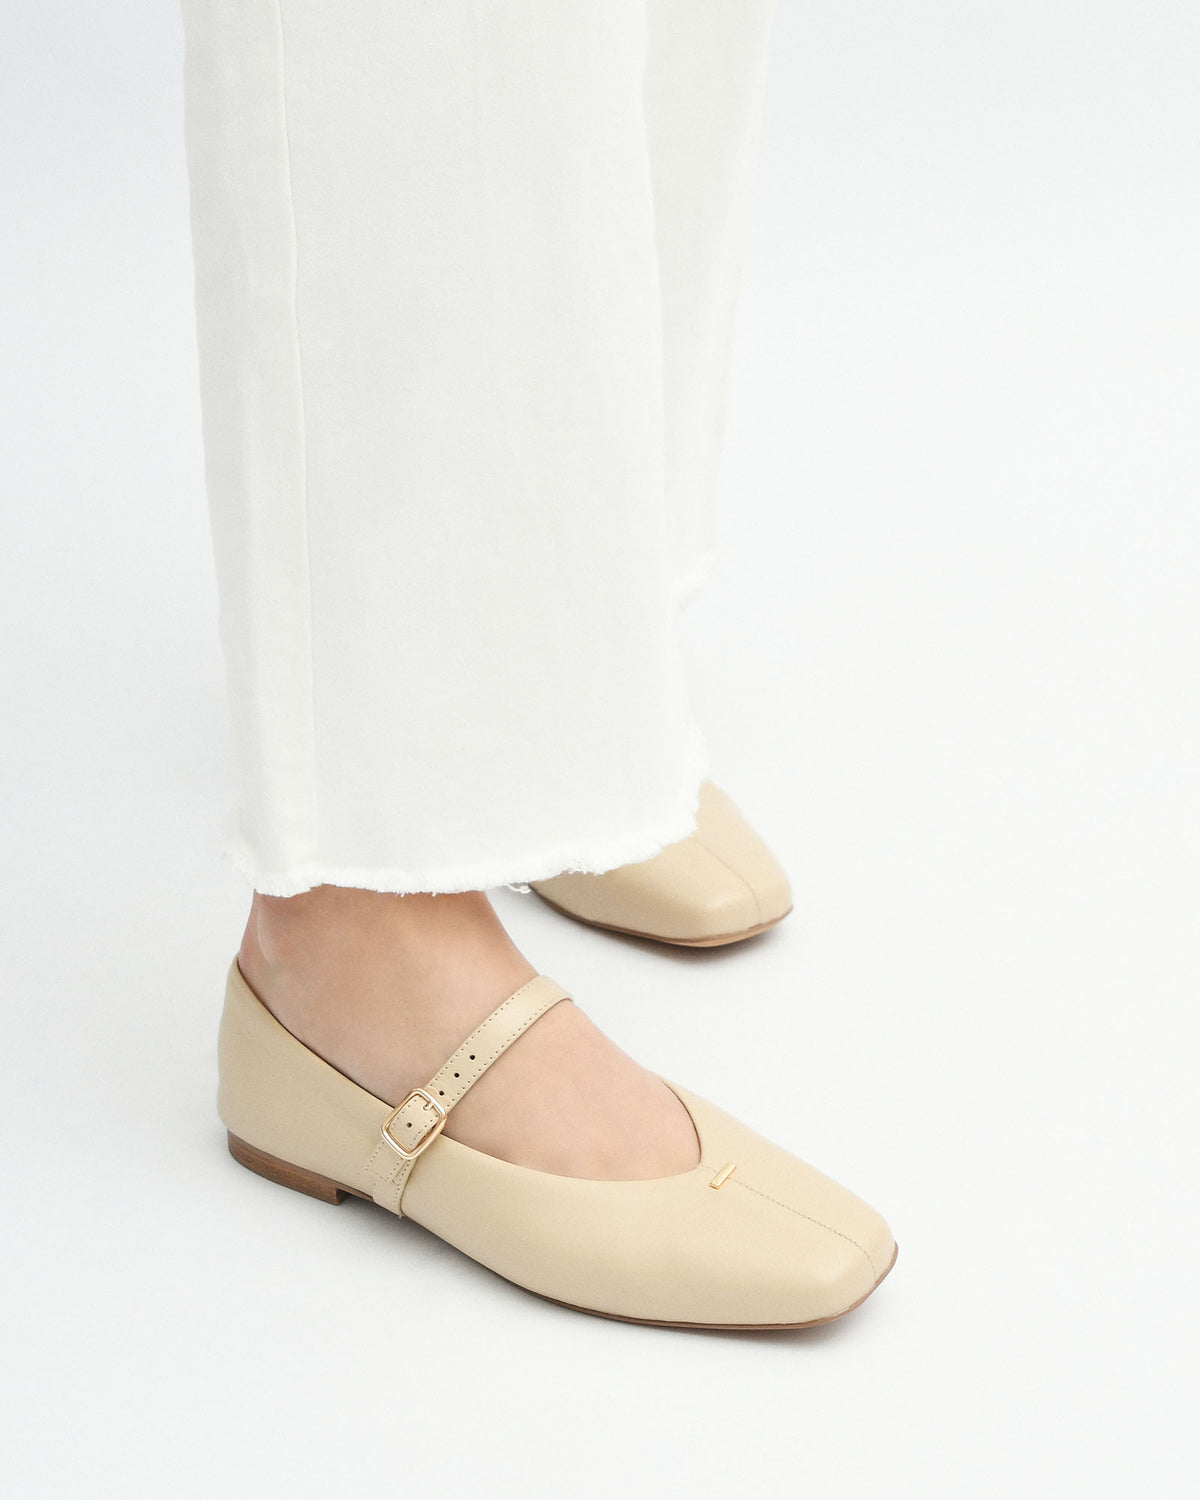 APRIL CASUAL FLATS SAND LEATHER